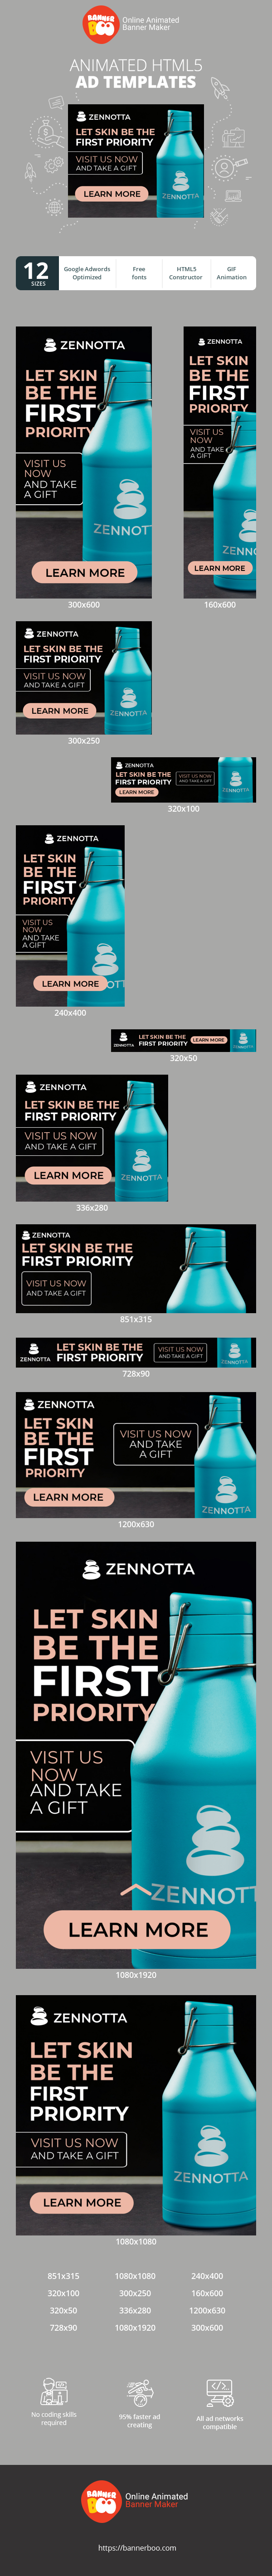 Banner ad template — Let Skin Be The First Priority — Visit Us Now And Take A Gift